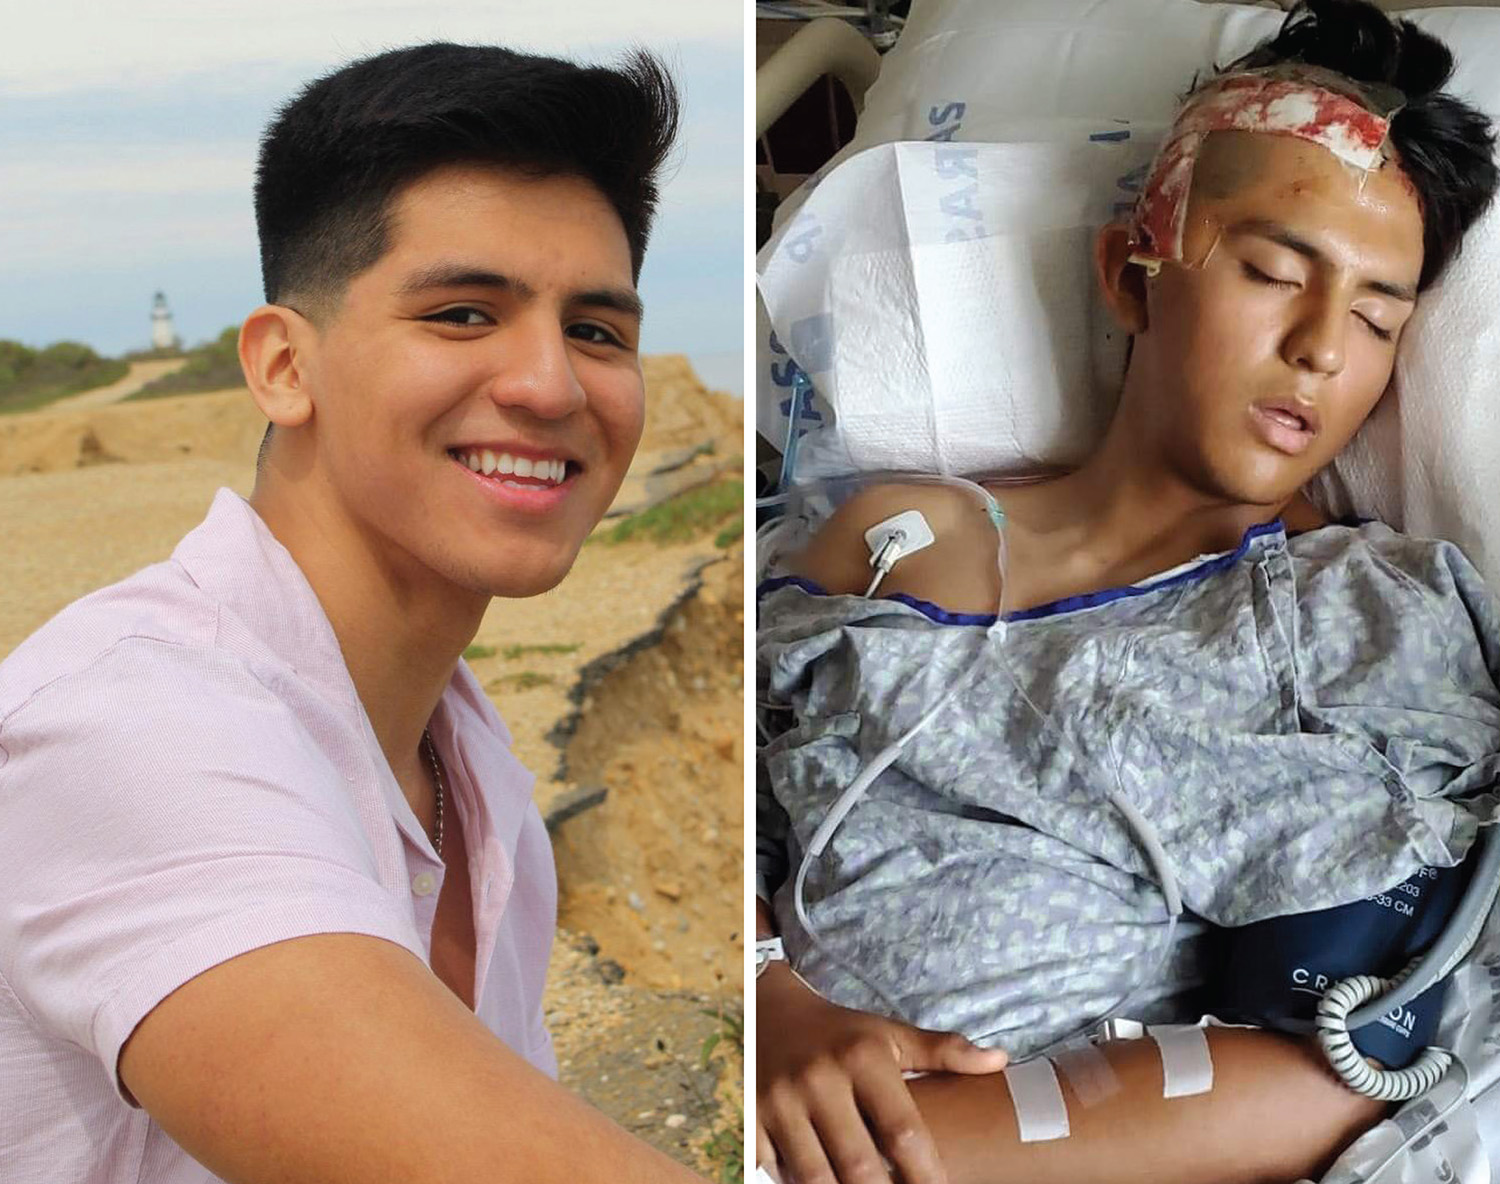 Meryl Streep's nephew Charles Streep's alleged victim David Peralta-Mera before the attack, at left, and afterwards, at right.